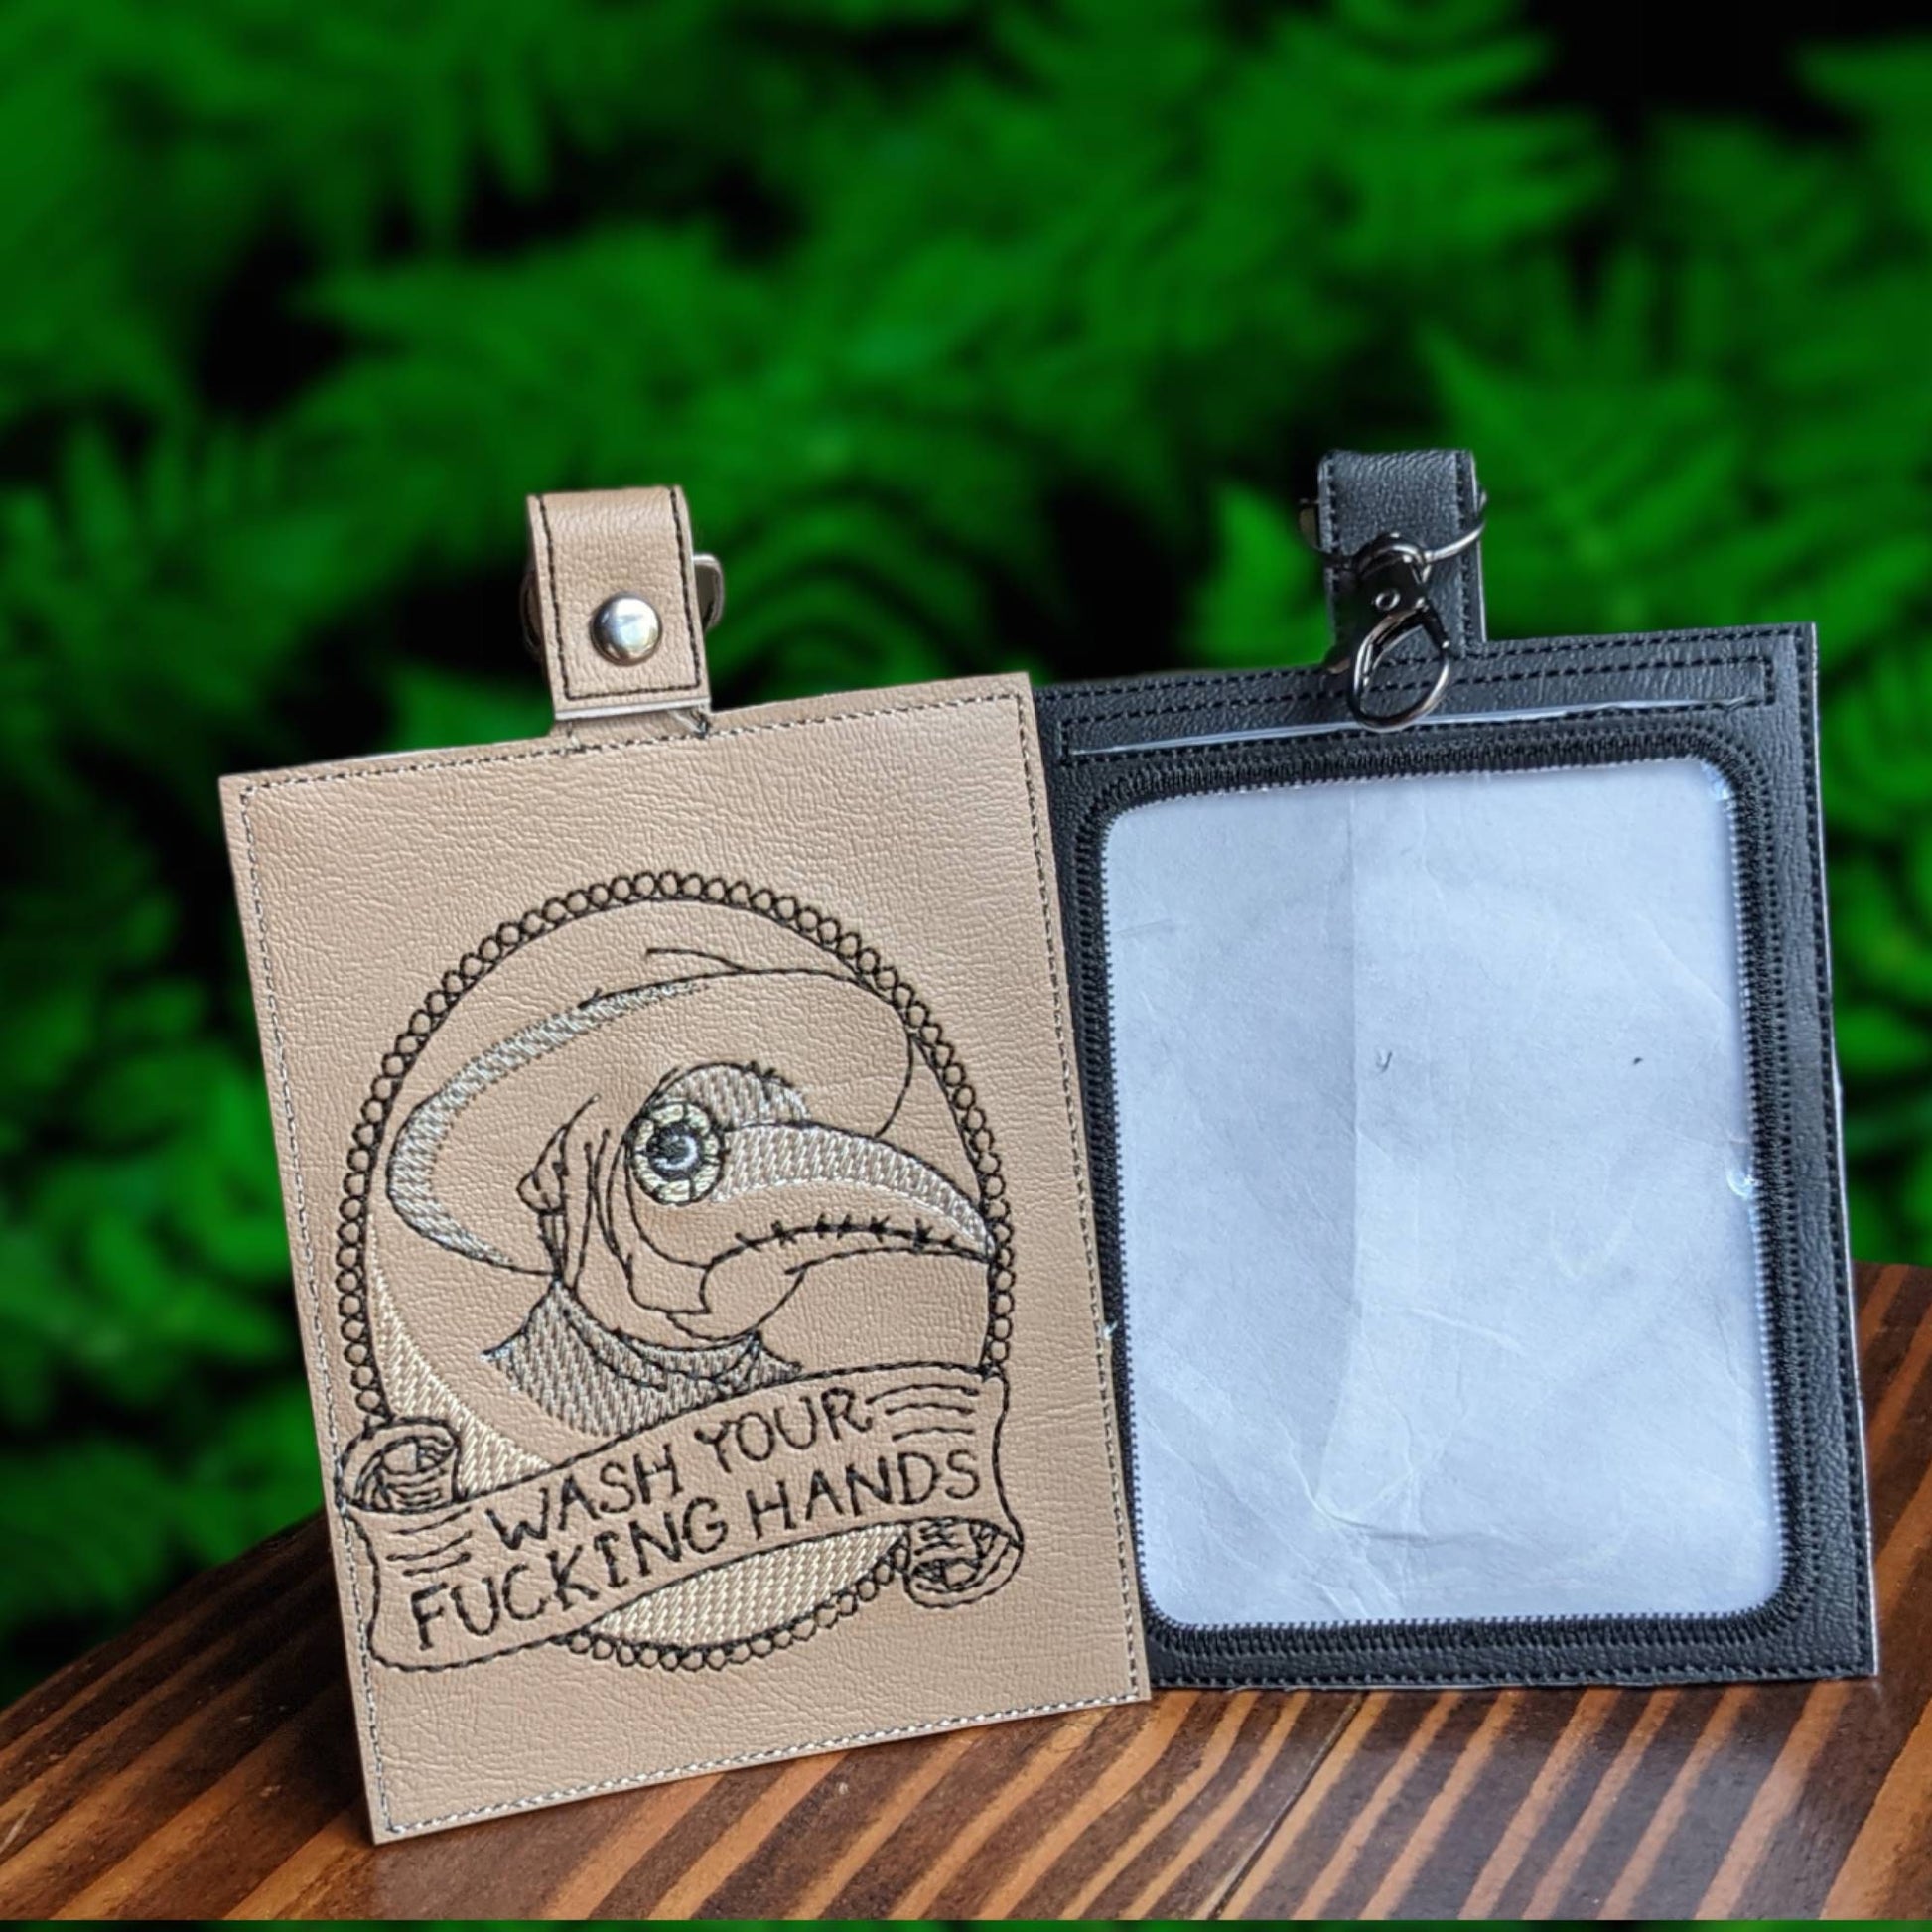 Plague doctor vaccination card protector,space for valuables. Easily Attach to purse, bag, backback or beltloops. Vinyl, cork, leather.